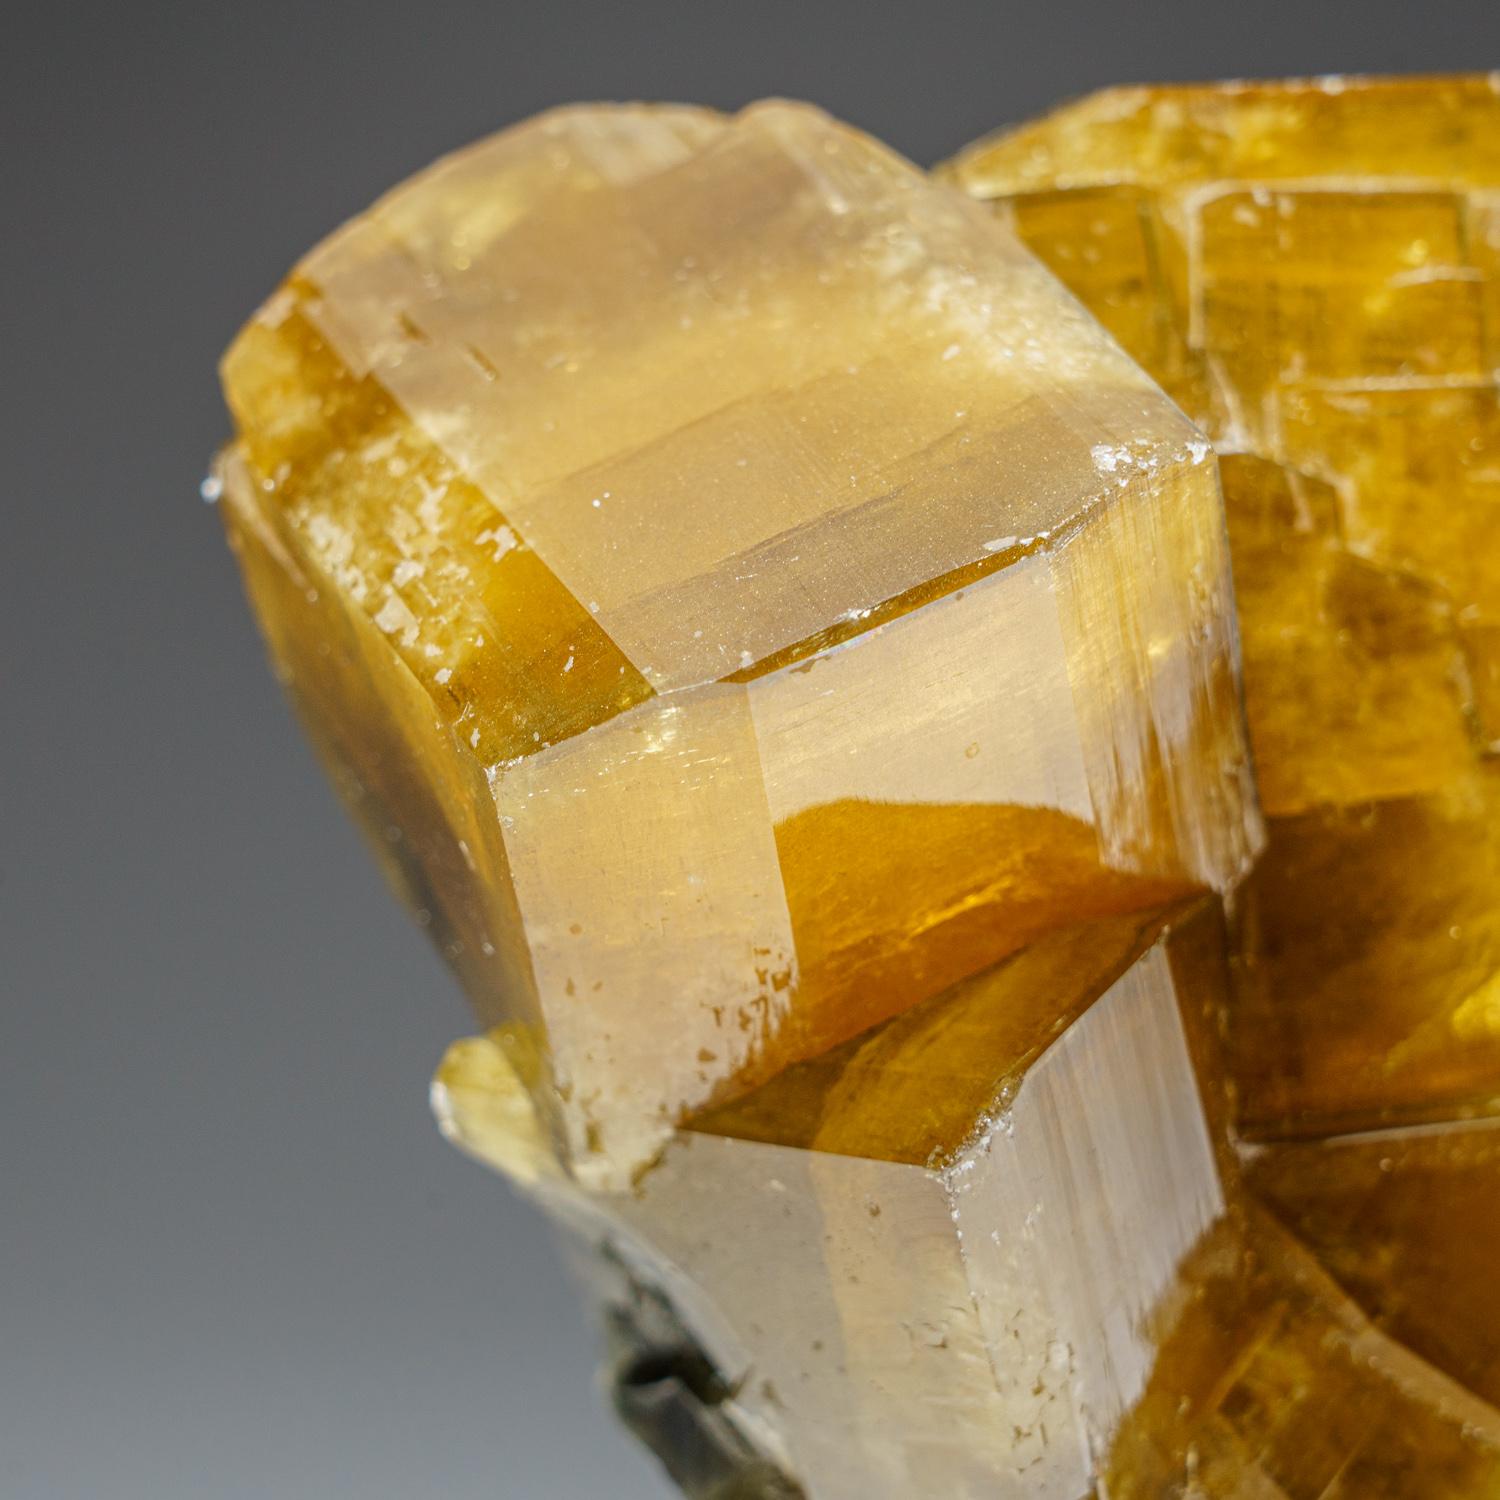 From Lushi, Henan Province, China.

Long cluster of large, blocky crystals of yellow-tan barite crystals. The barites are translucent and show internal growth phantoms.


Weight: 2.8 lbs, dimensions: 3 x 3 x 5 inches.